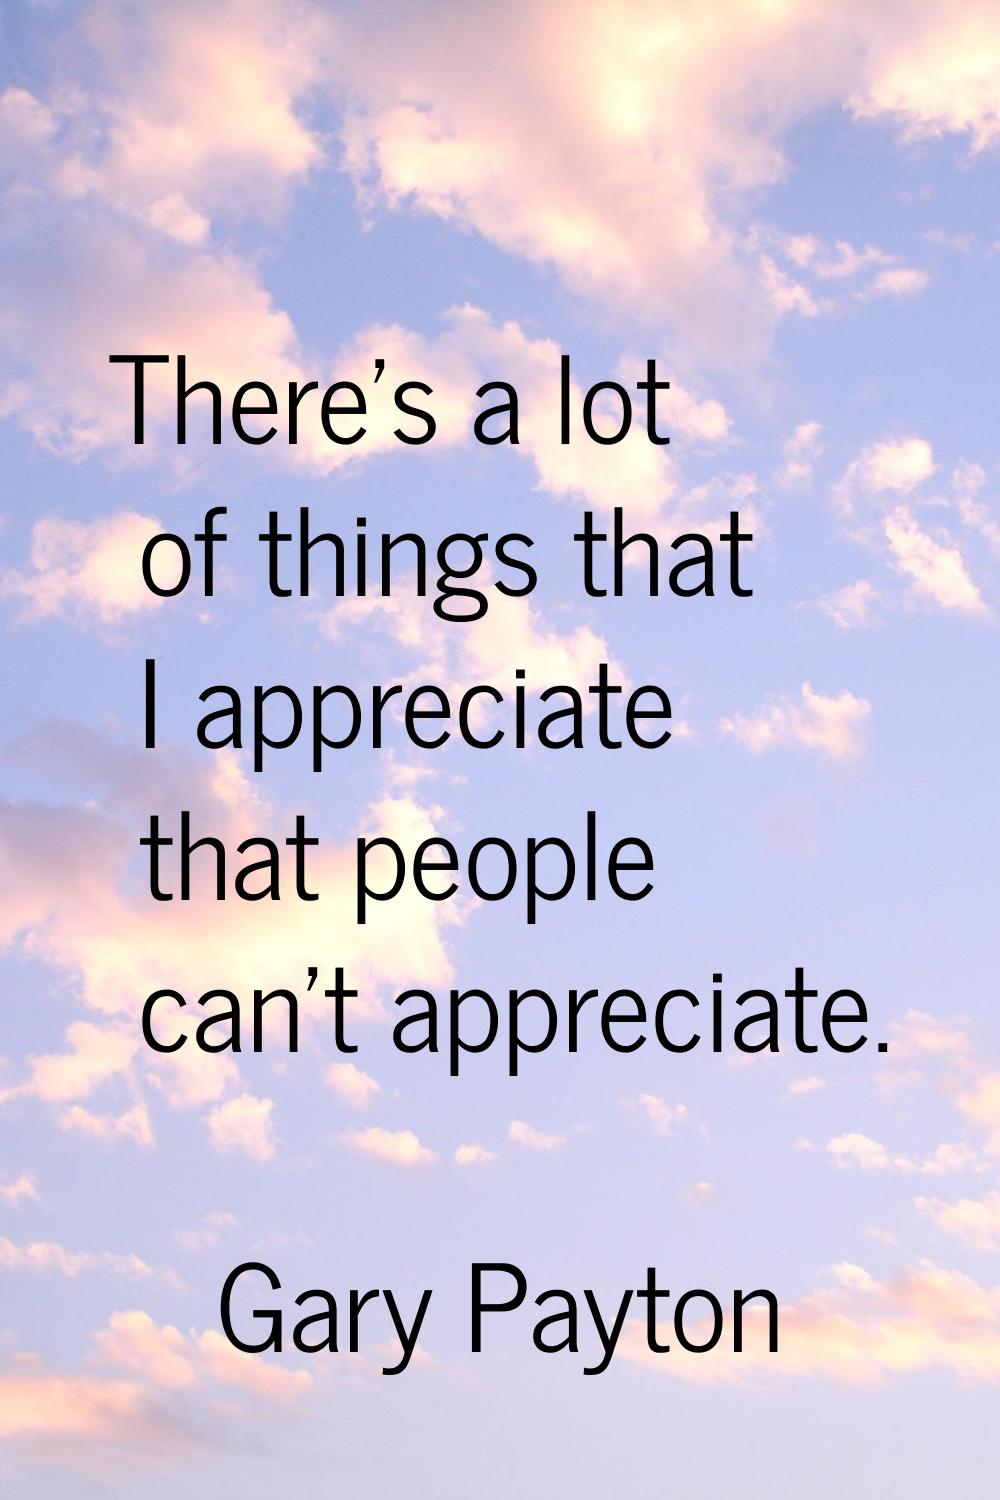 There's a lot of things that I appreciate that people can't appreciate.